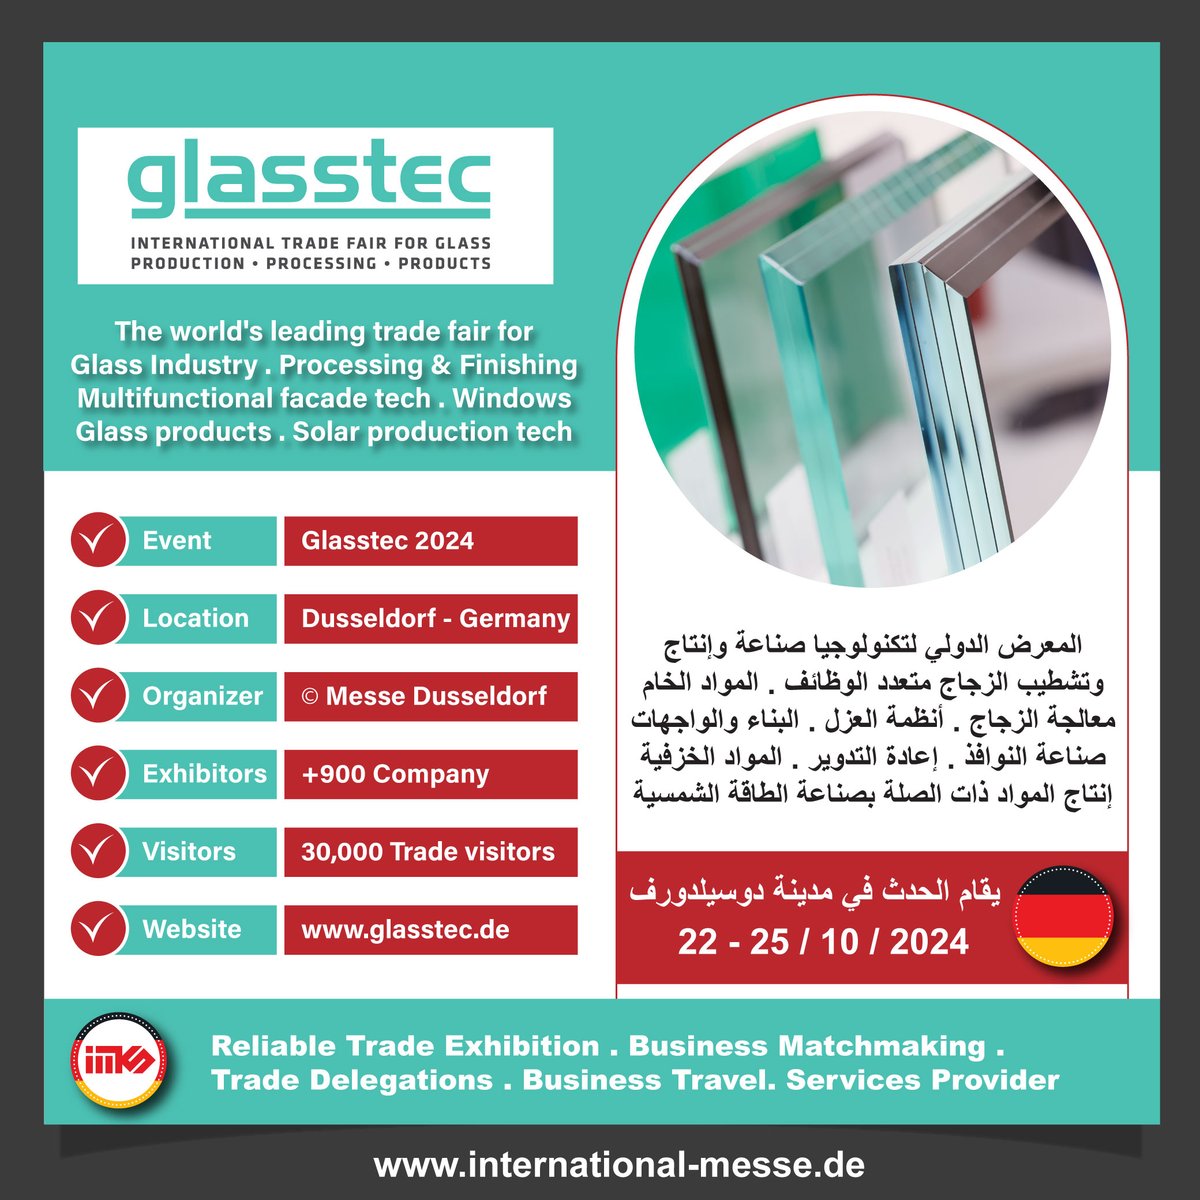 🇩🇪 #Germany | #Exhibitions | Glass industry
-
✅ Event : Glasstec 2024
✅ Cycle : Every 2 years
✅ Date: 22-25 October .2024
✅ Location: Dusseldorf , Germany